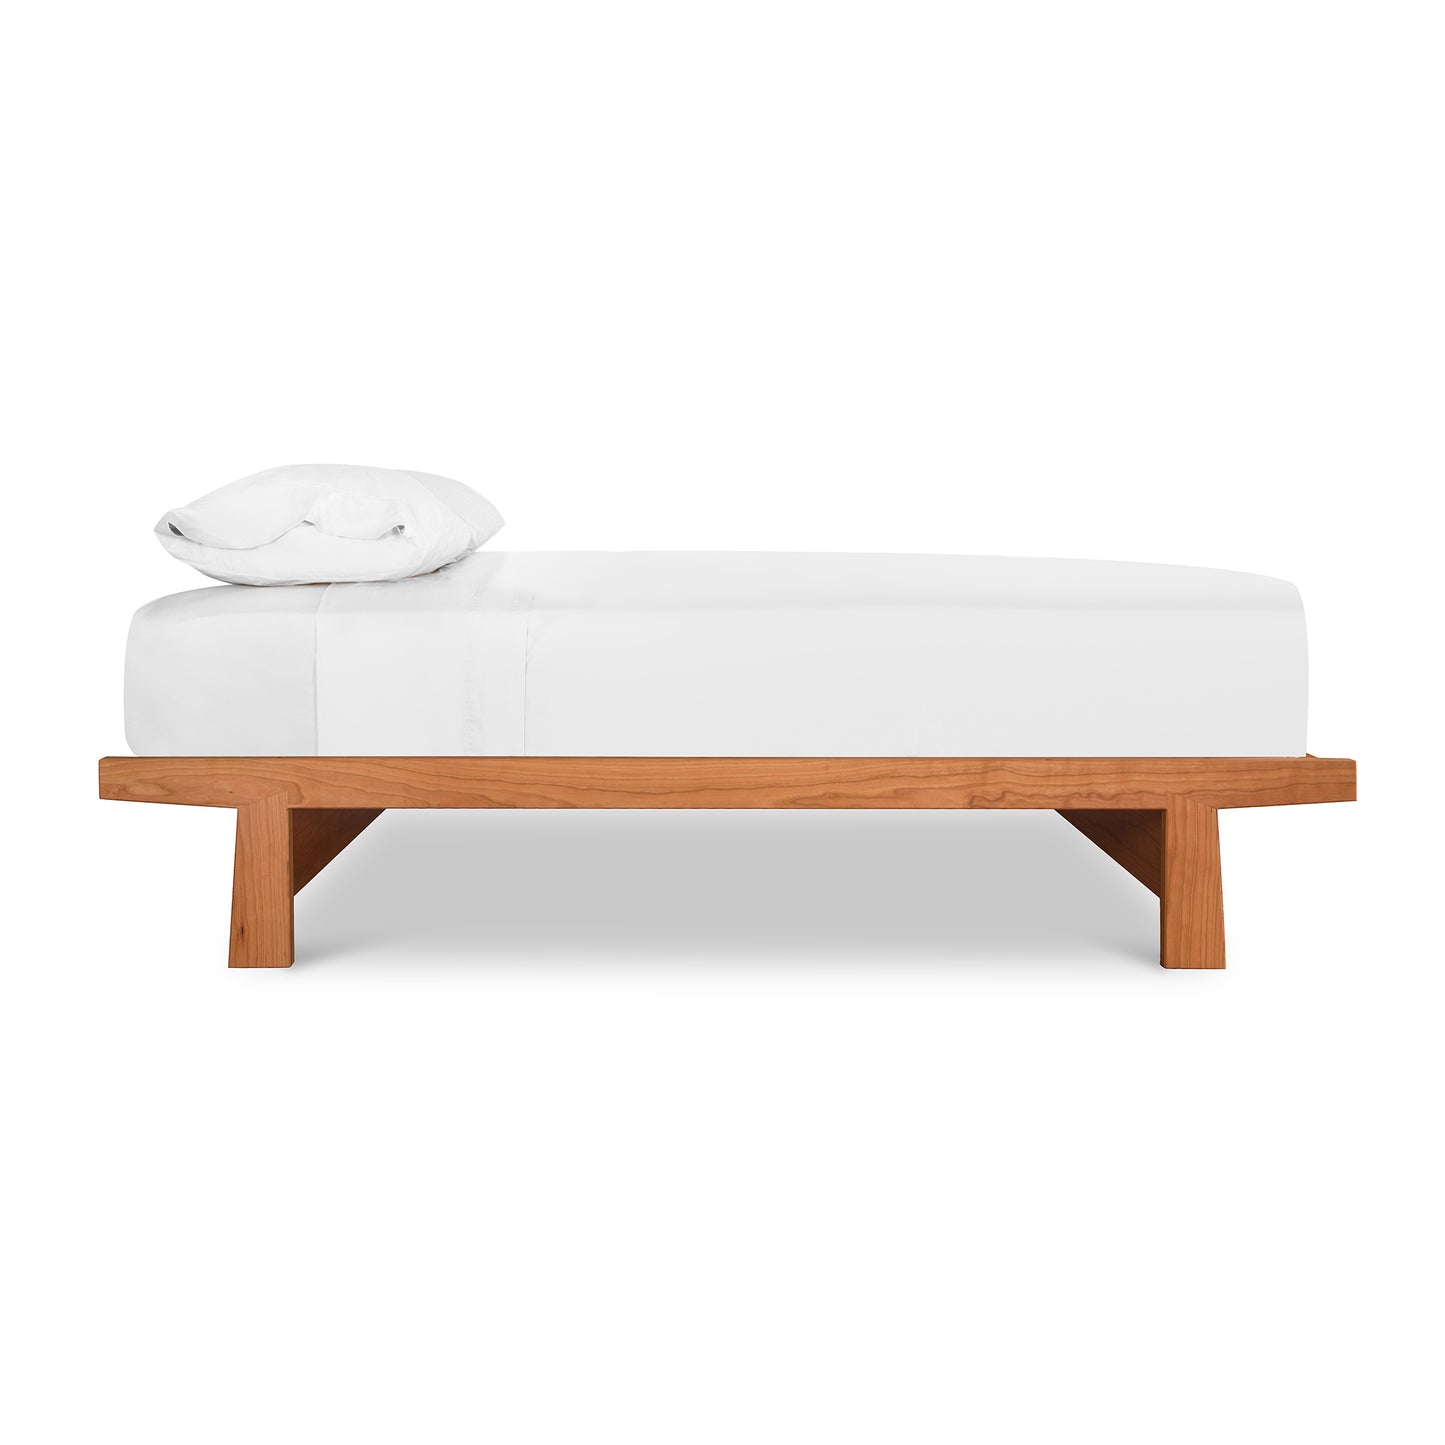 A simple modern Cherry Moon Dovetail Platform Bed with a wooden base crafted from solid, sustainably harvested woods and a white cushioned top, including a single white pillow at one end. The bed is set against a plain.